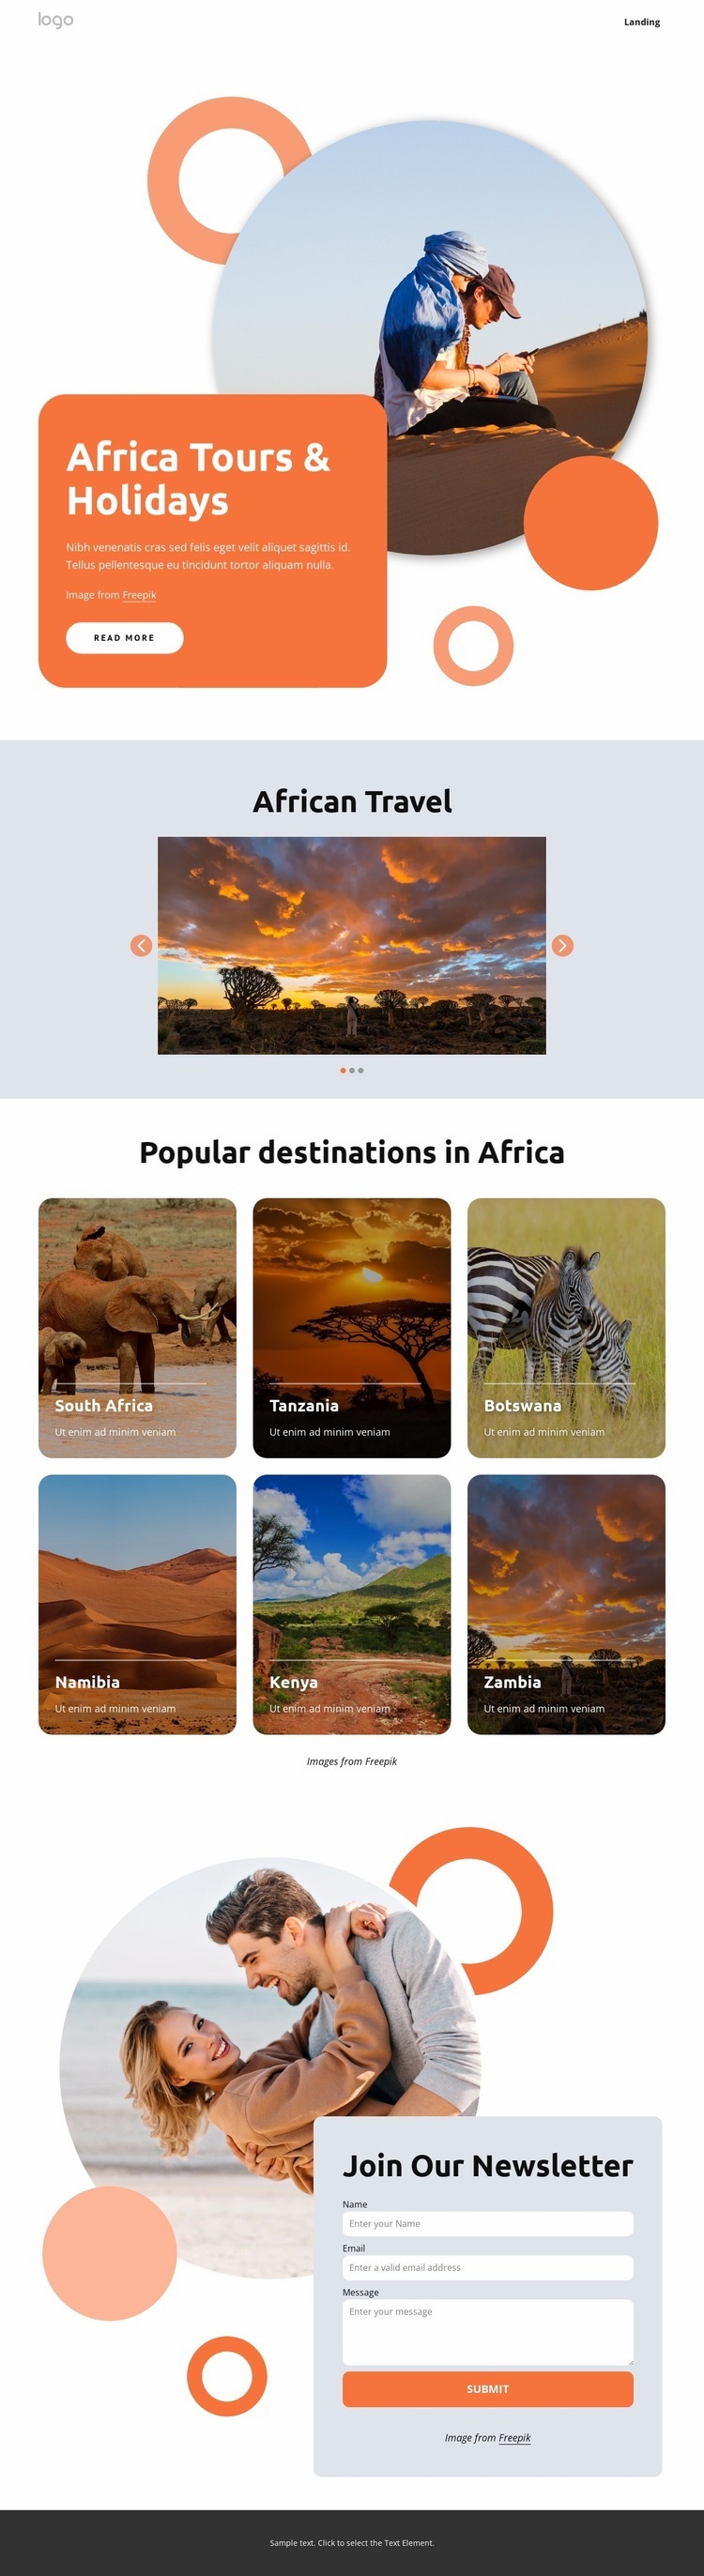 Hand-crafted African holidays Web Page Design